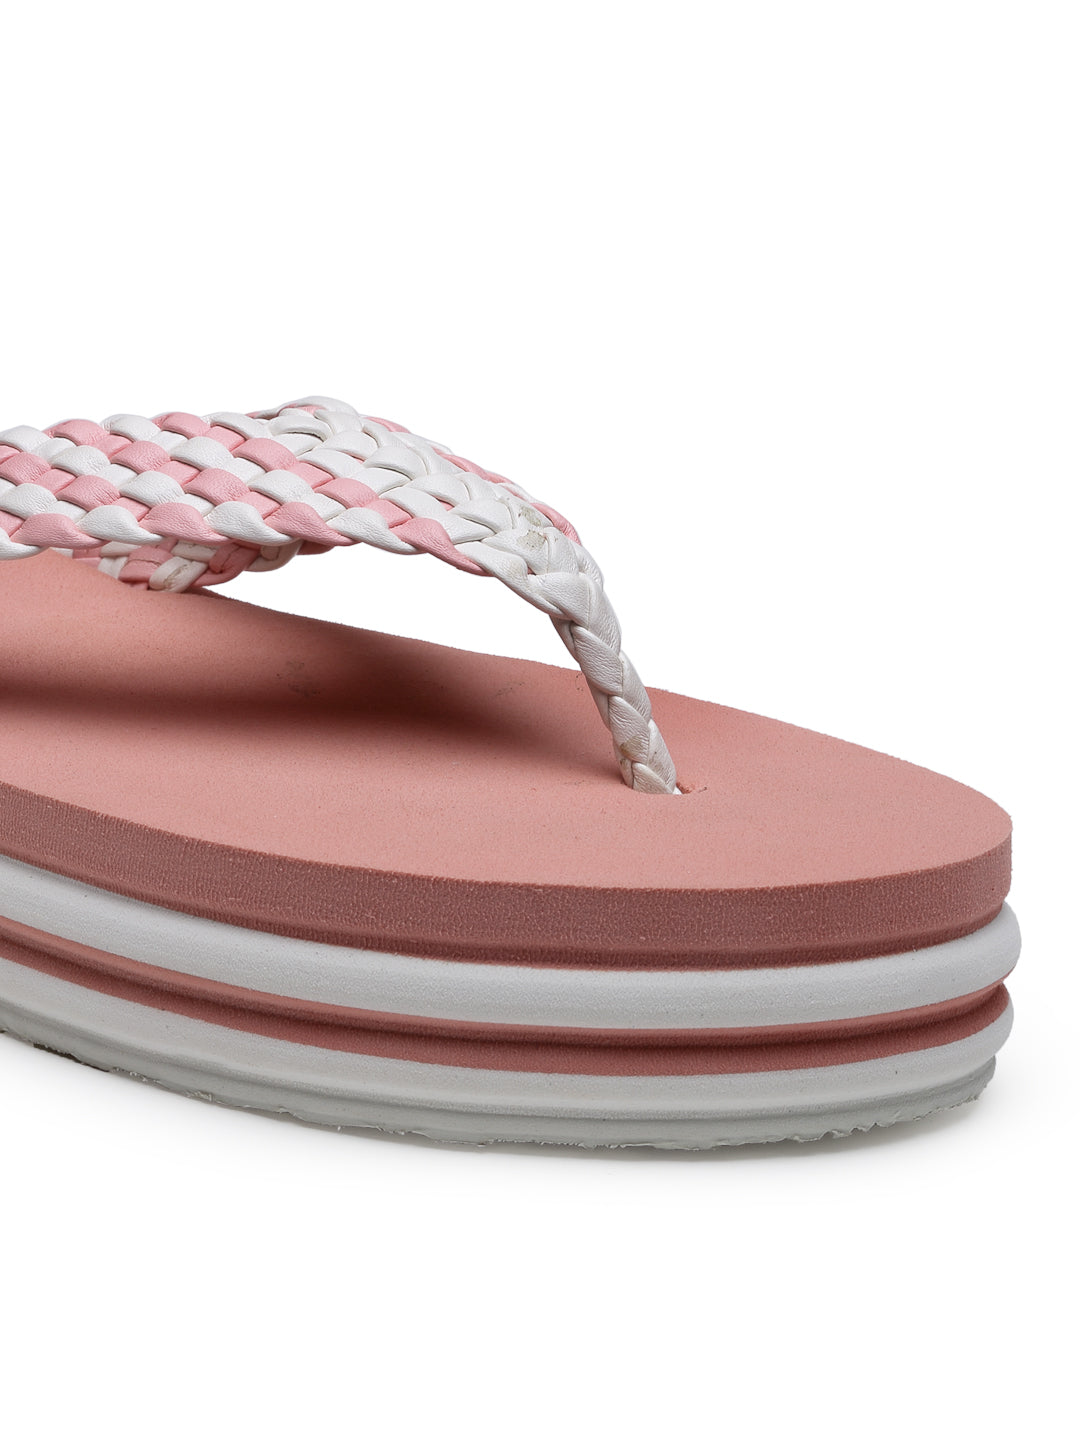 Pink Solid PU Leather Slip On Casual Slippers For Women